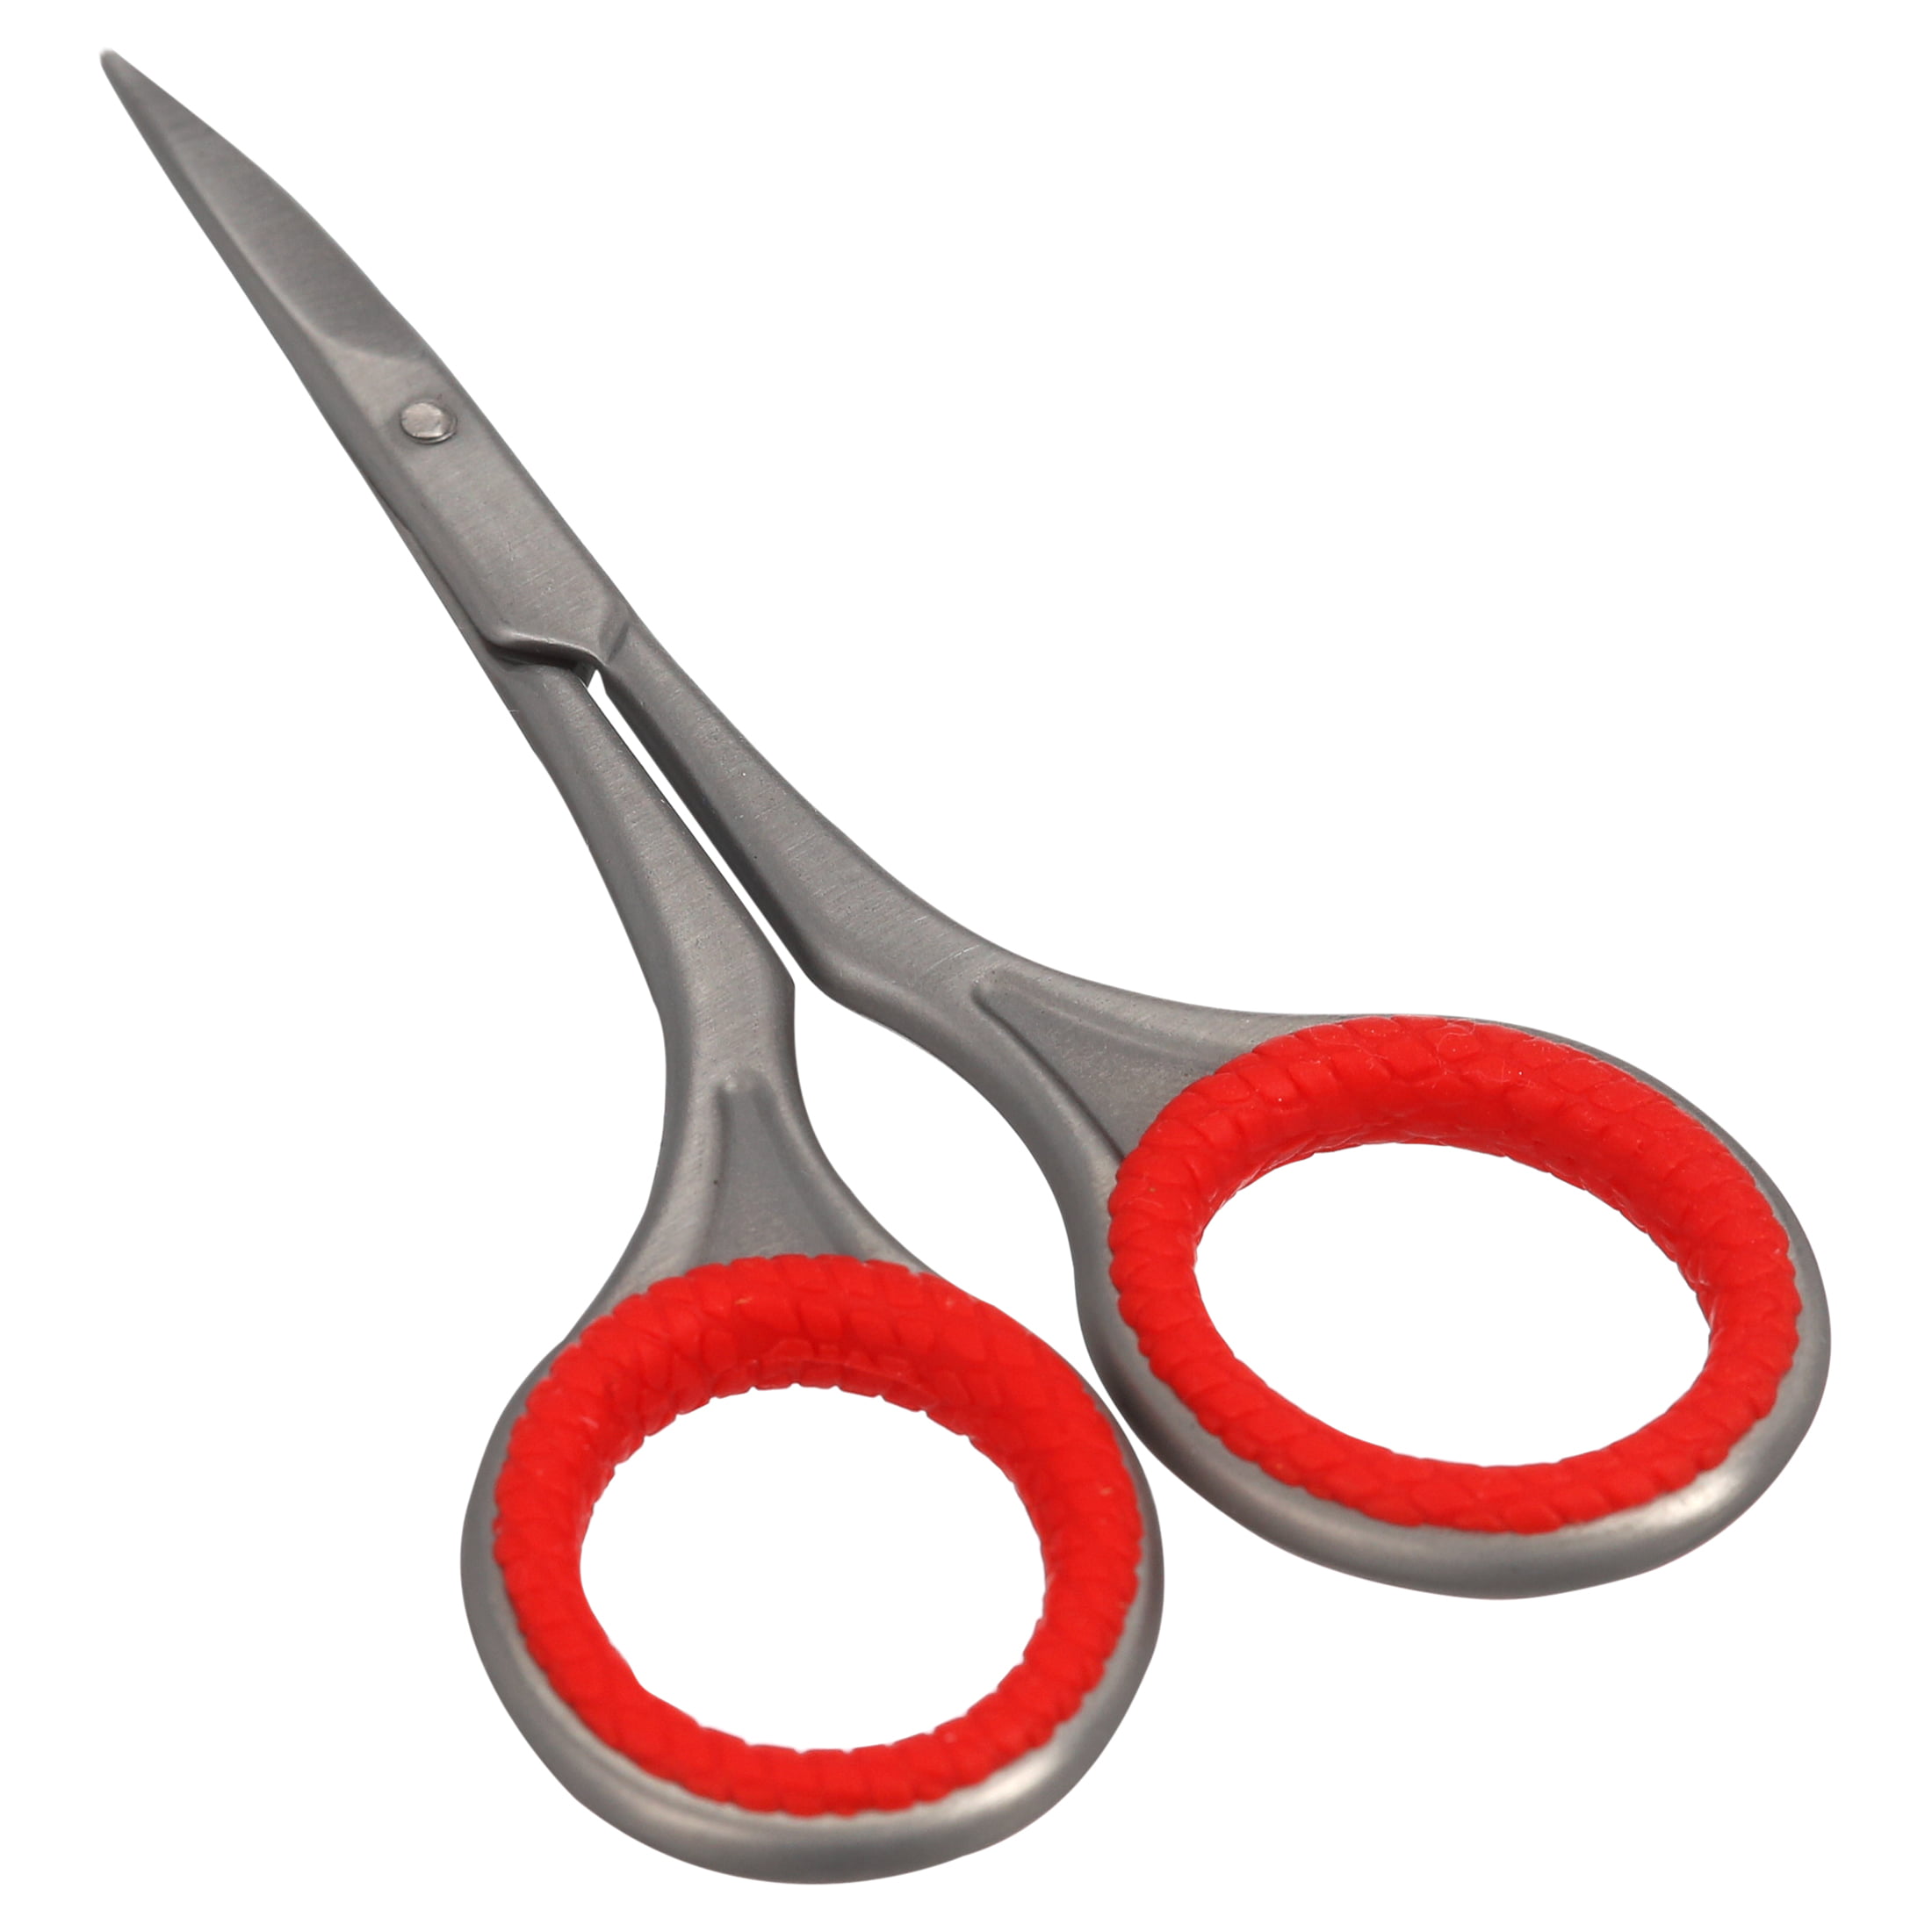 150 Nail scissors – curved